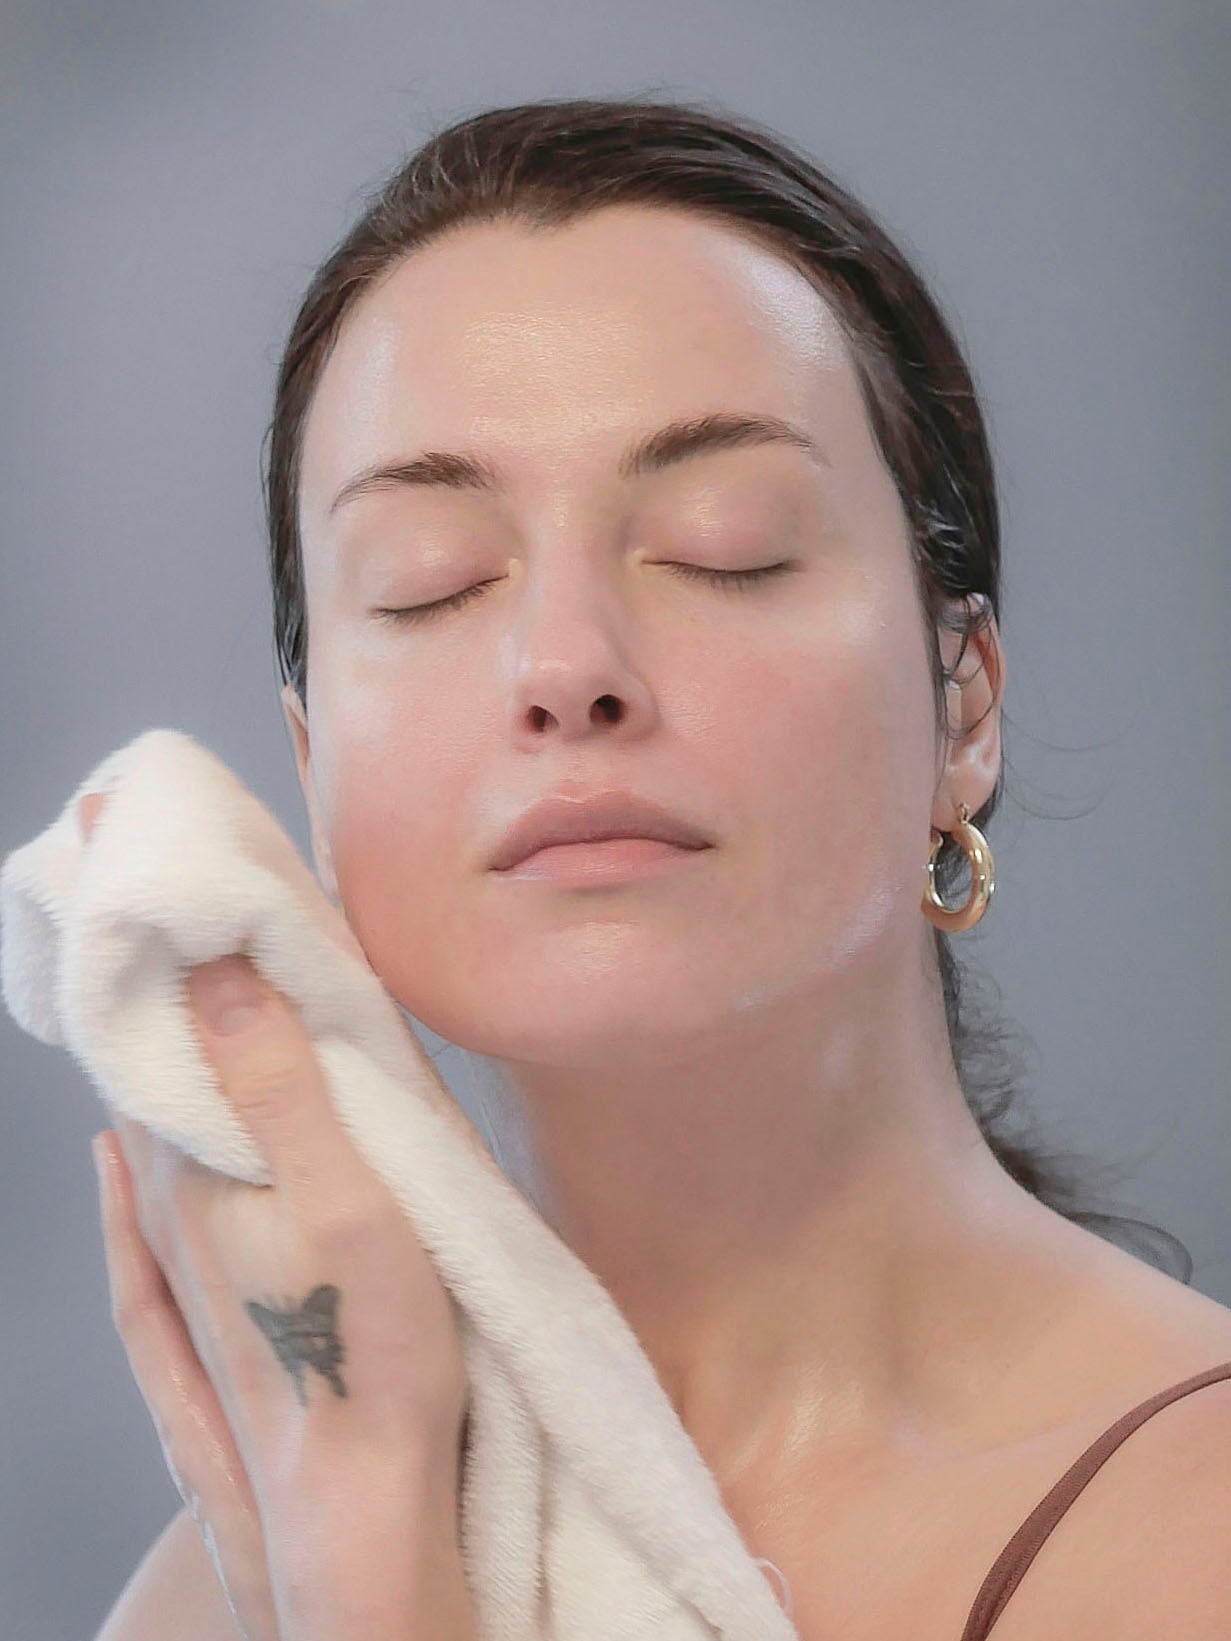 A woman drying face after using a PM cleansing balm